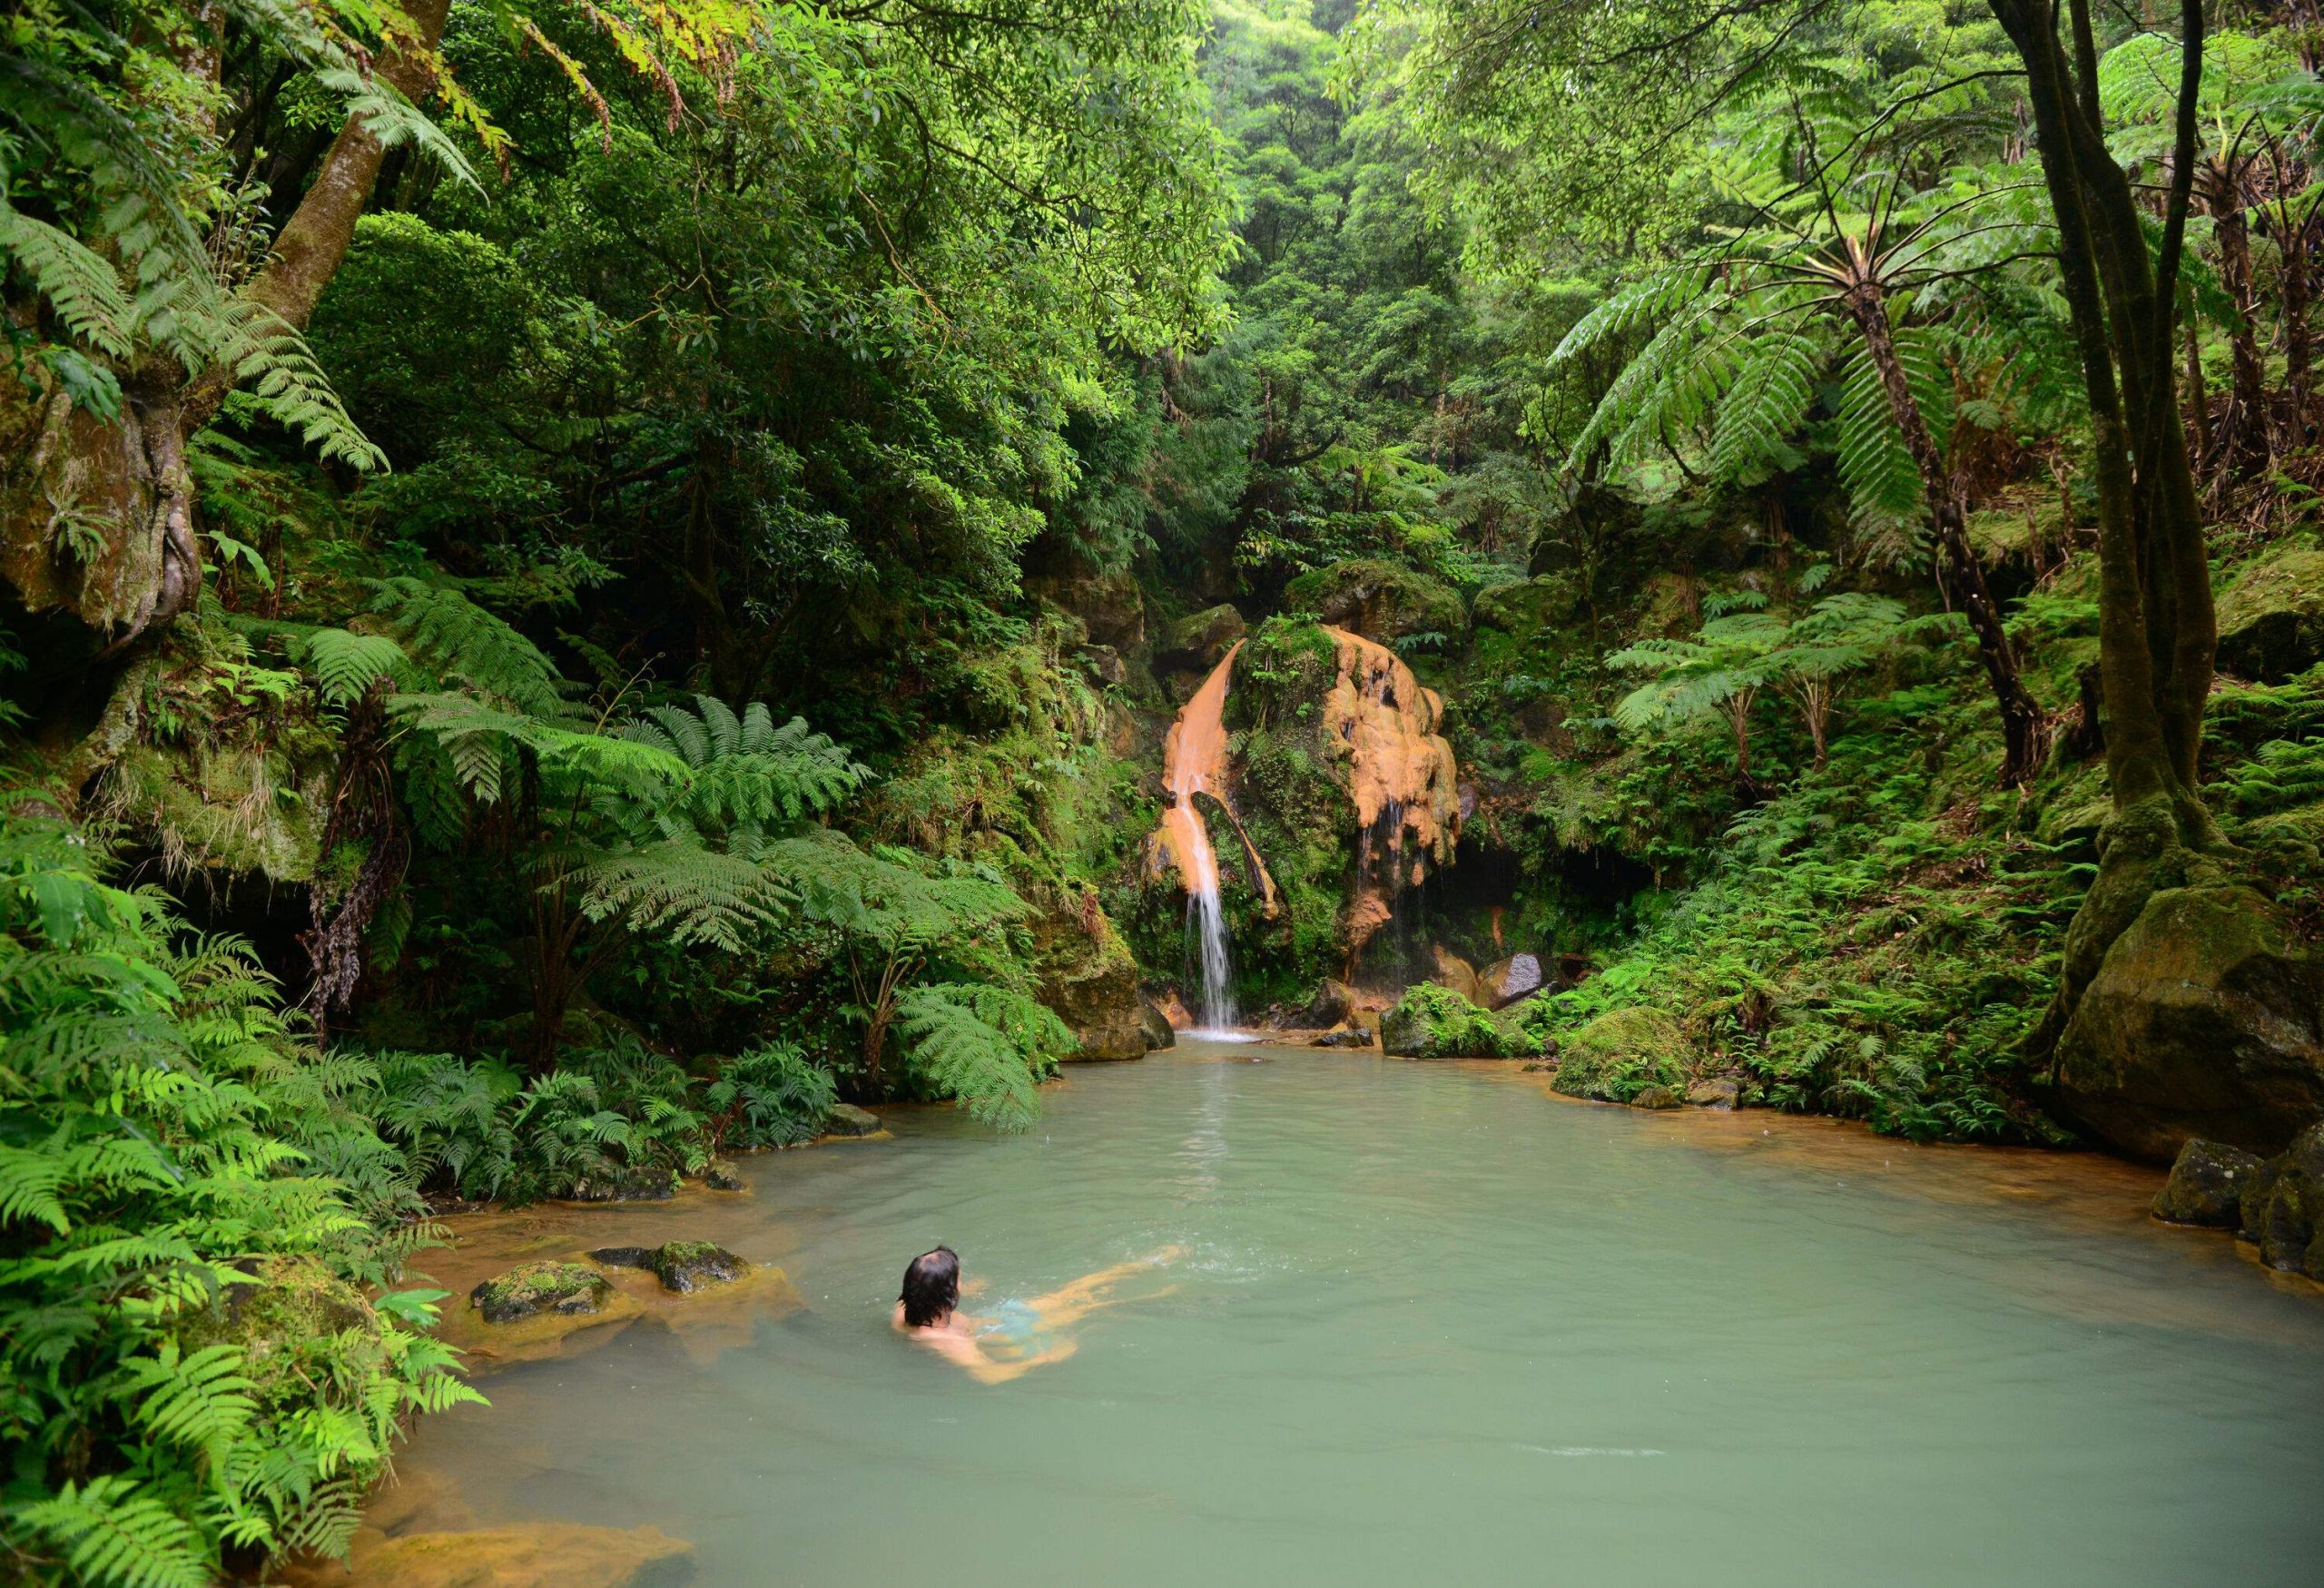 An individual swimming in a natural hot spring in the forest.